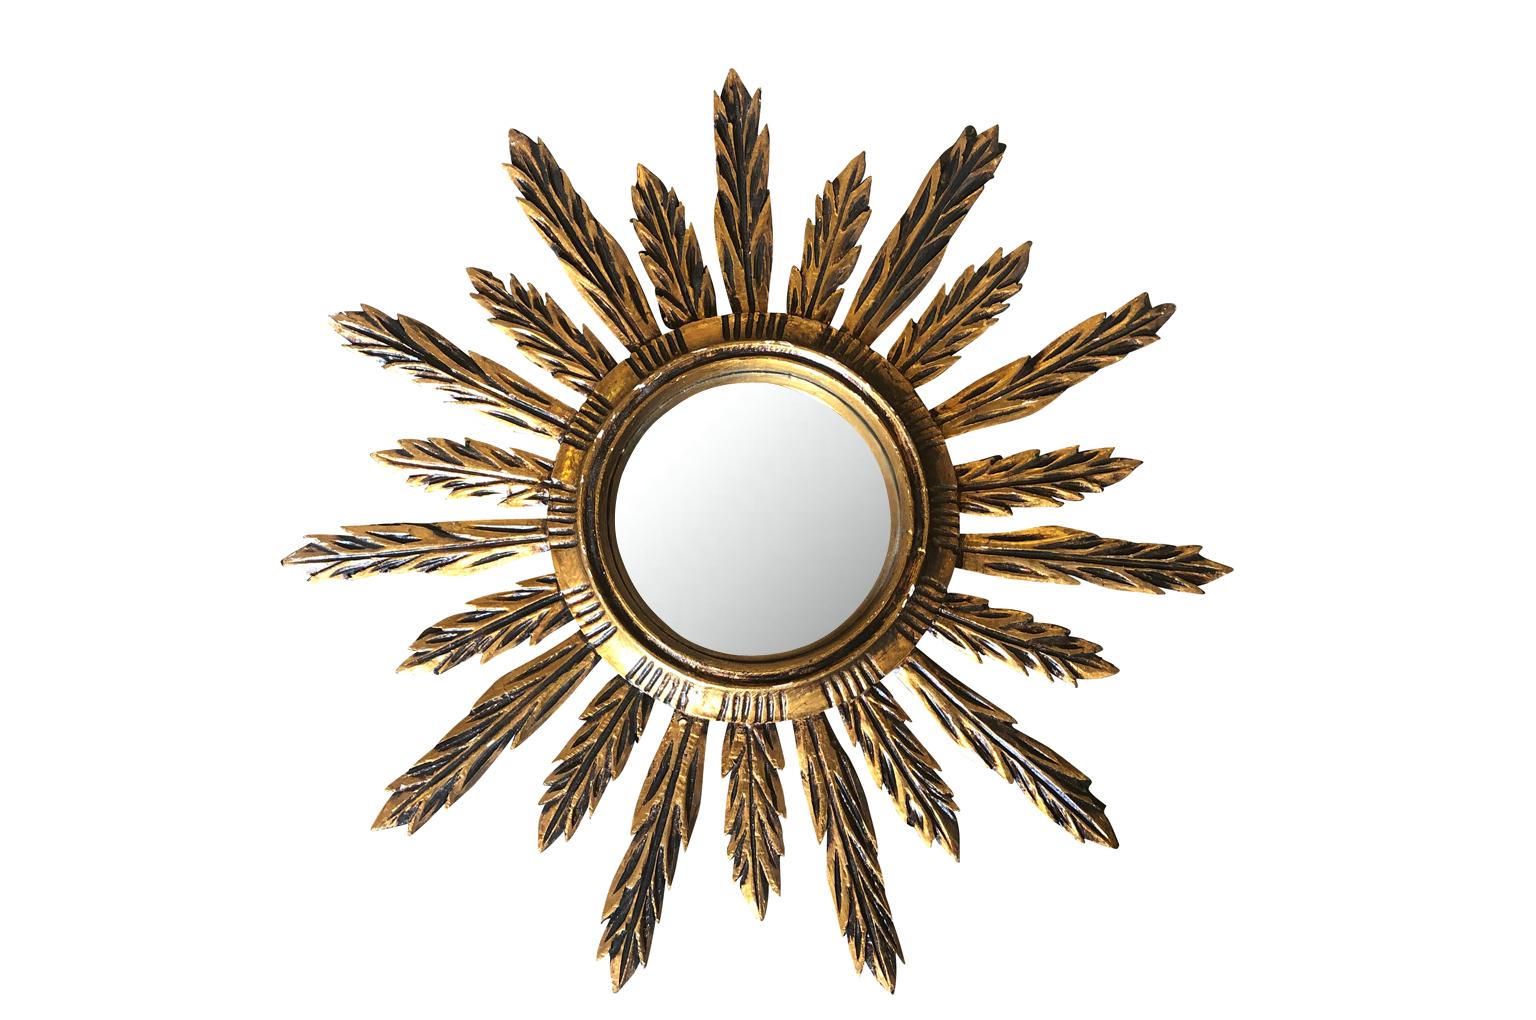 A very lovely Spanish sunburst mirror in hand carved giltwood with its convex mirror. A charming accent piece.